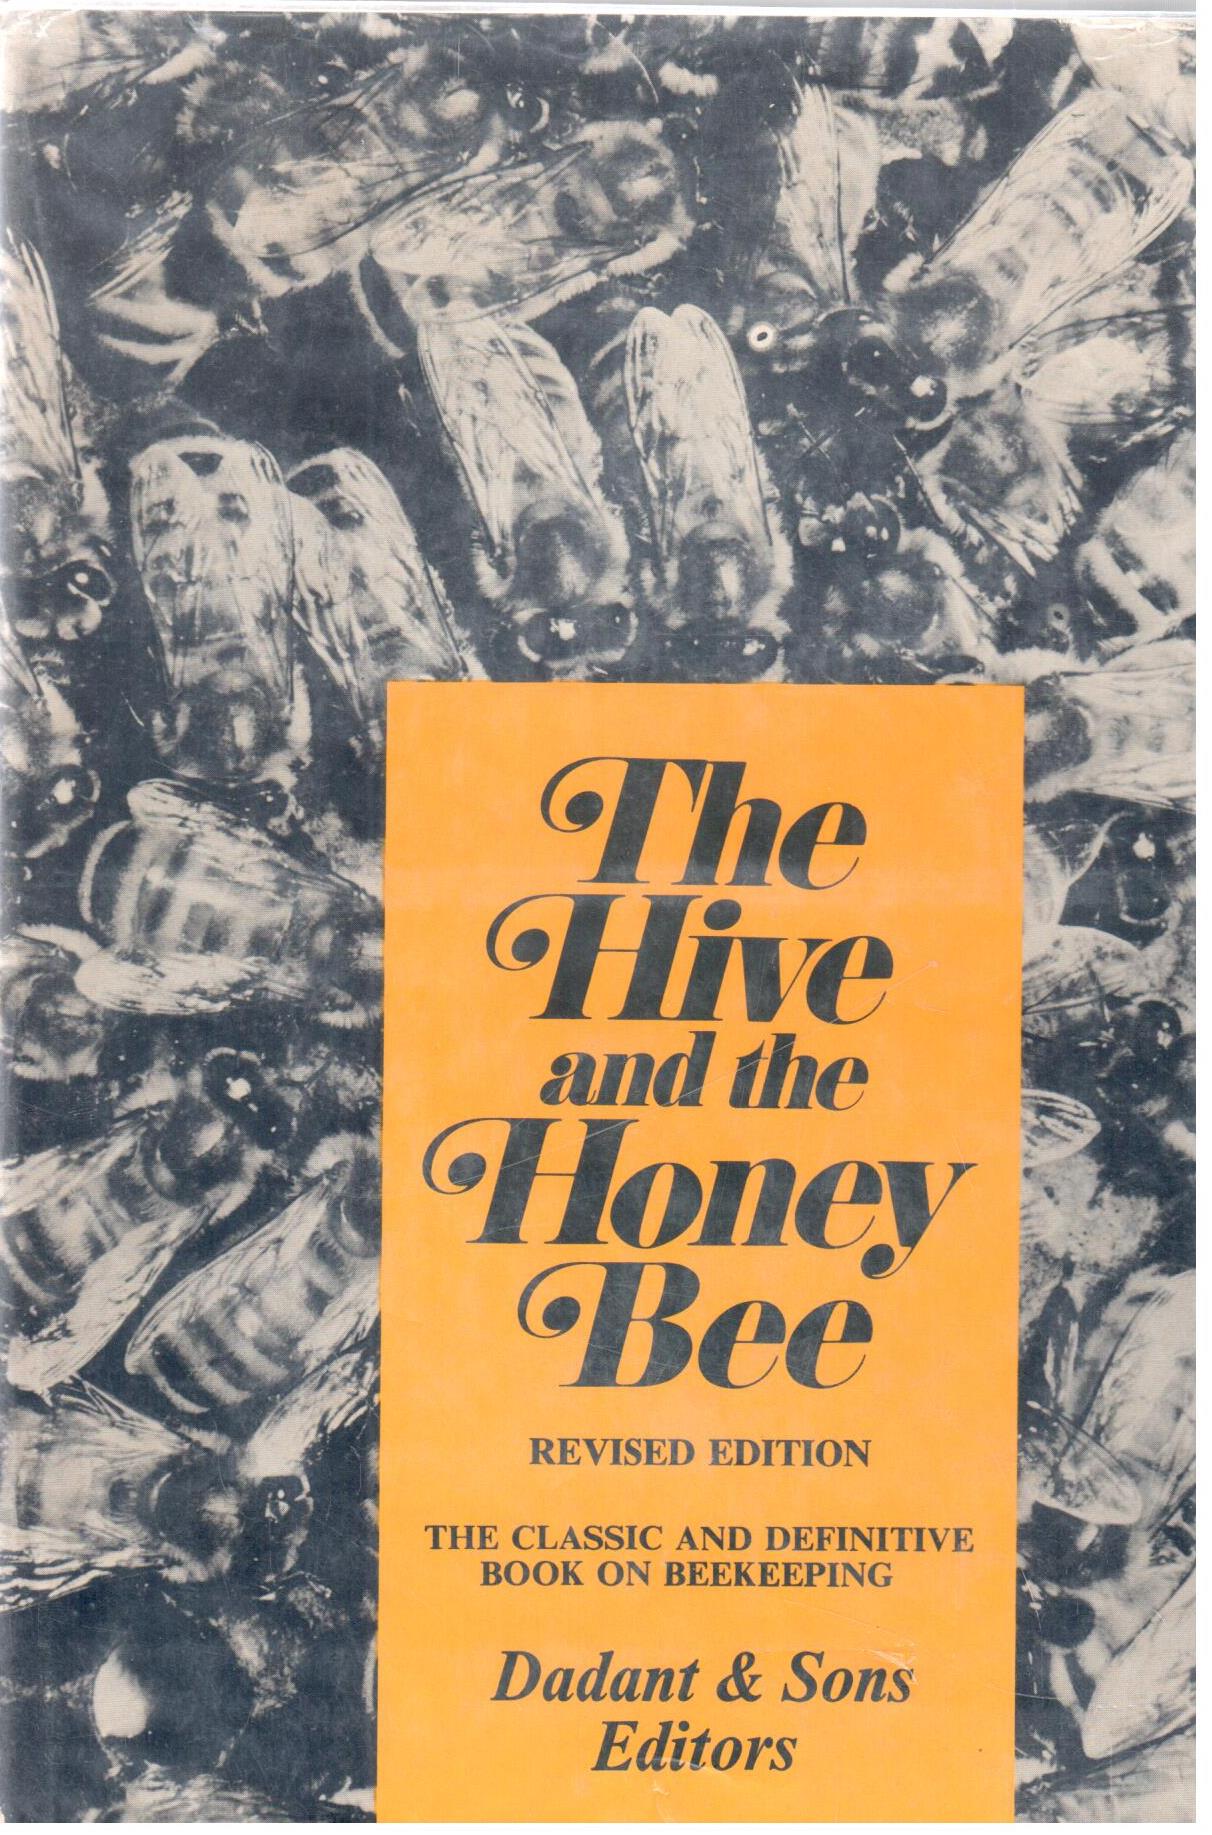 The Hive and the honey bee : a new book on beekeeping which continues the tradition of "Langstroth on the hive and the honeybee"